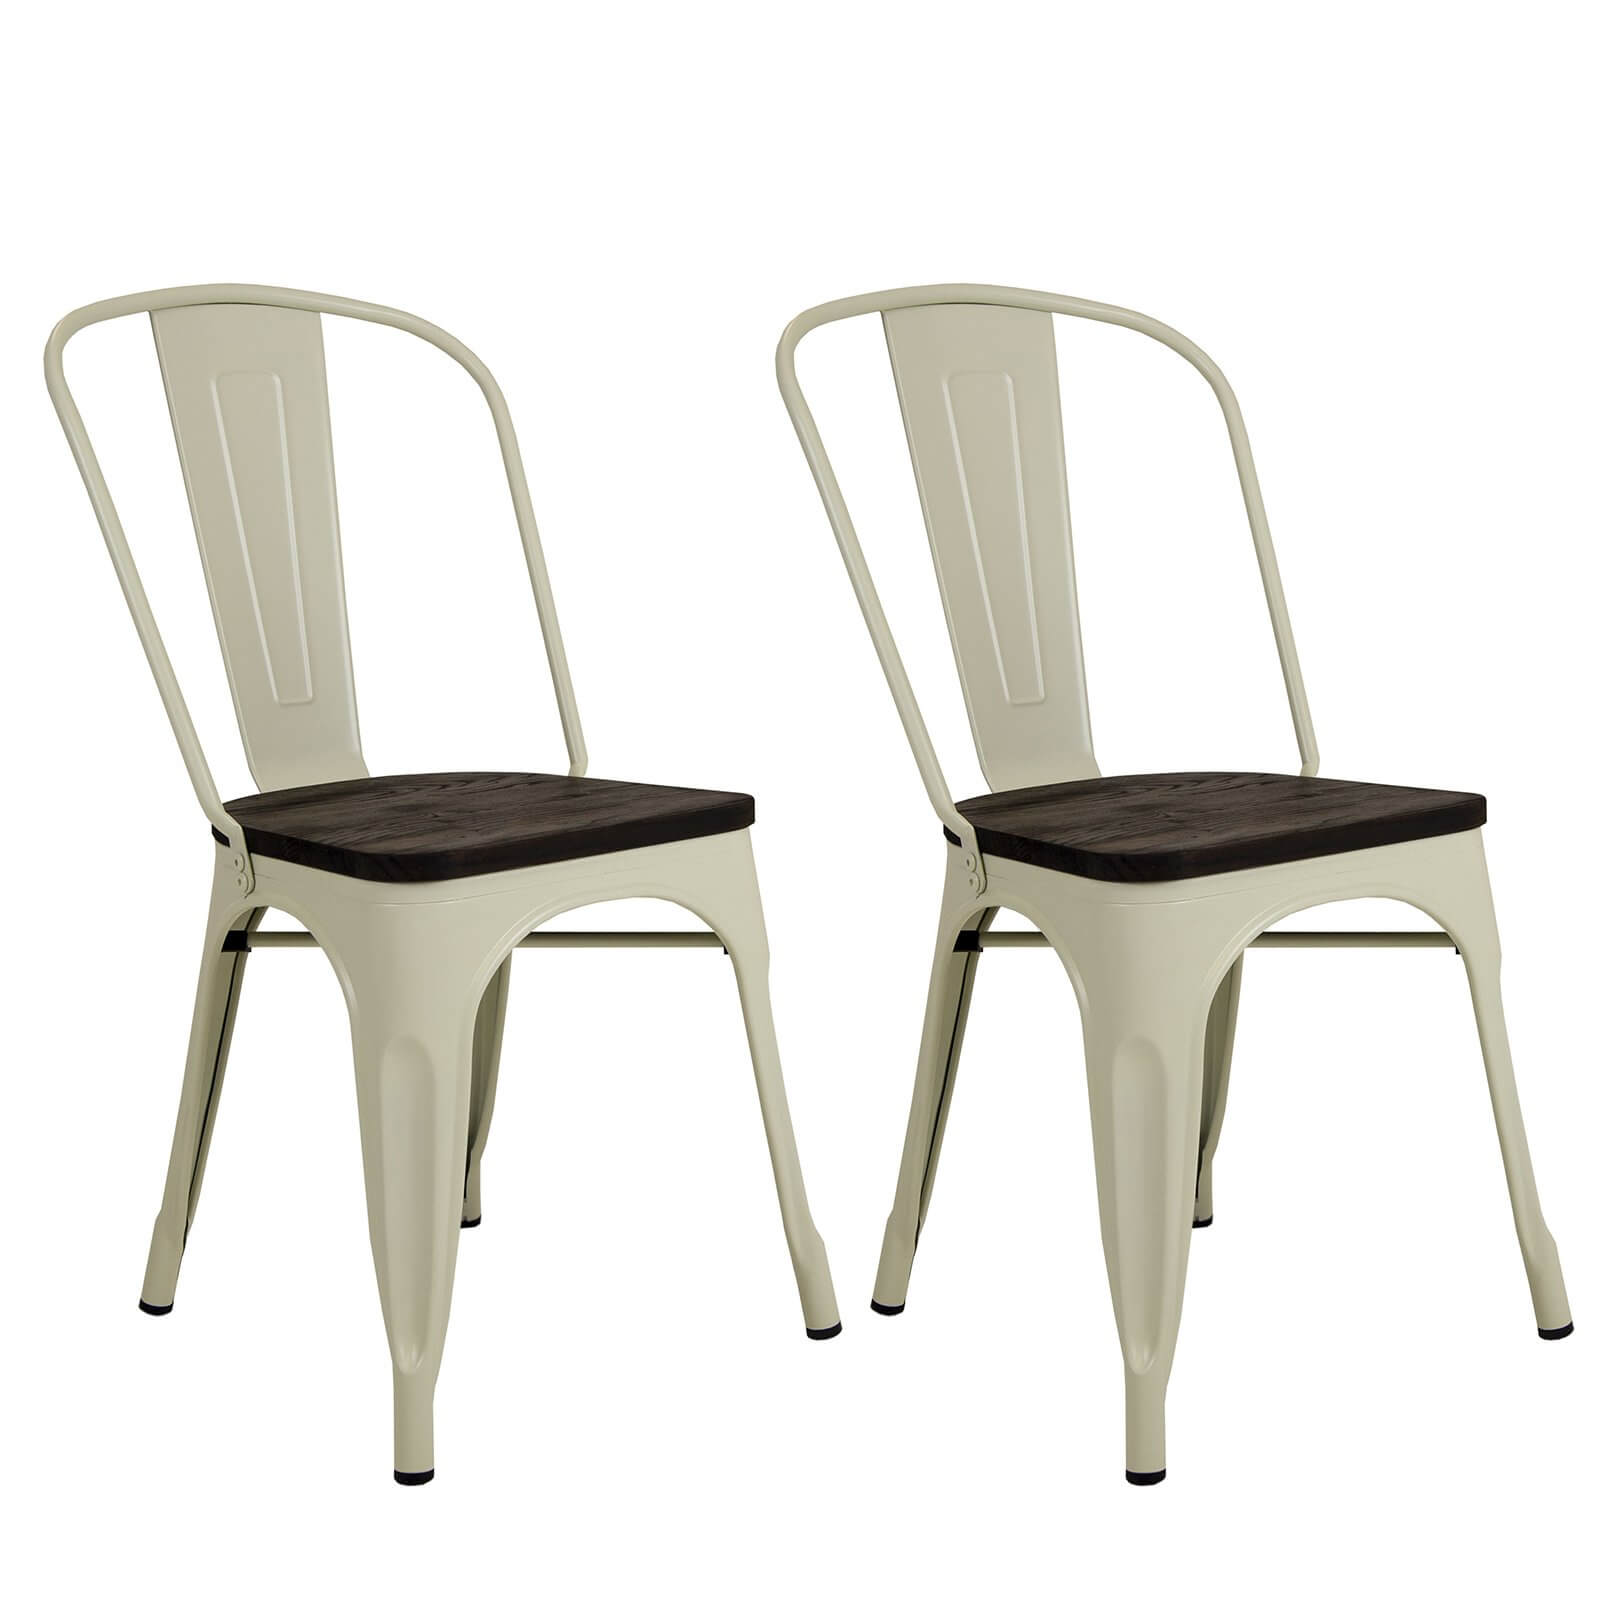 Pair of Metal & Wood Dining Chairs - Cream